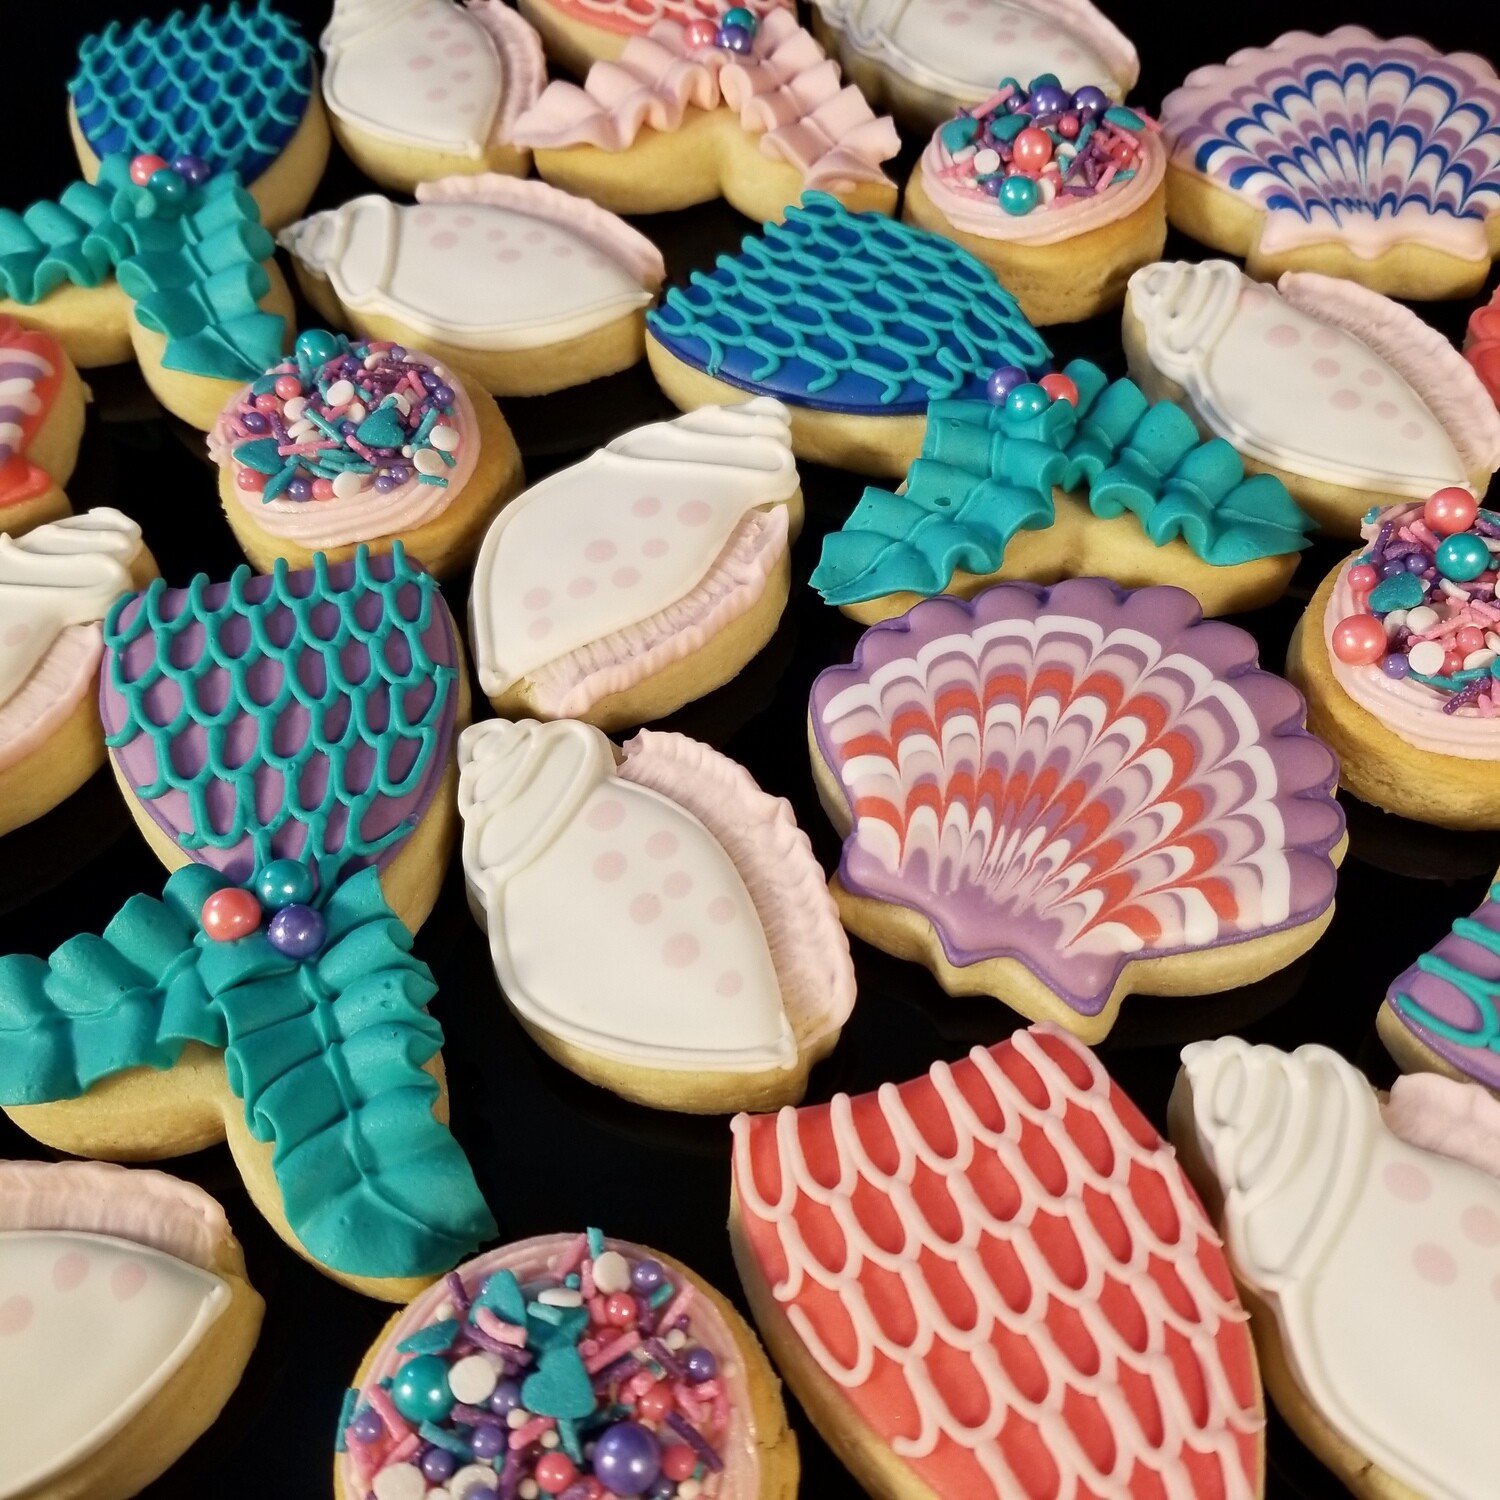 'Mermaid Tails and Shells Decorating Workshop - FRIDAY, JUNE 5th at 6:30 p.m. (THE COOKIE DECORATING STUDIO)